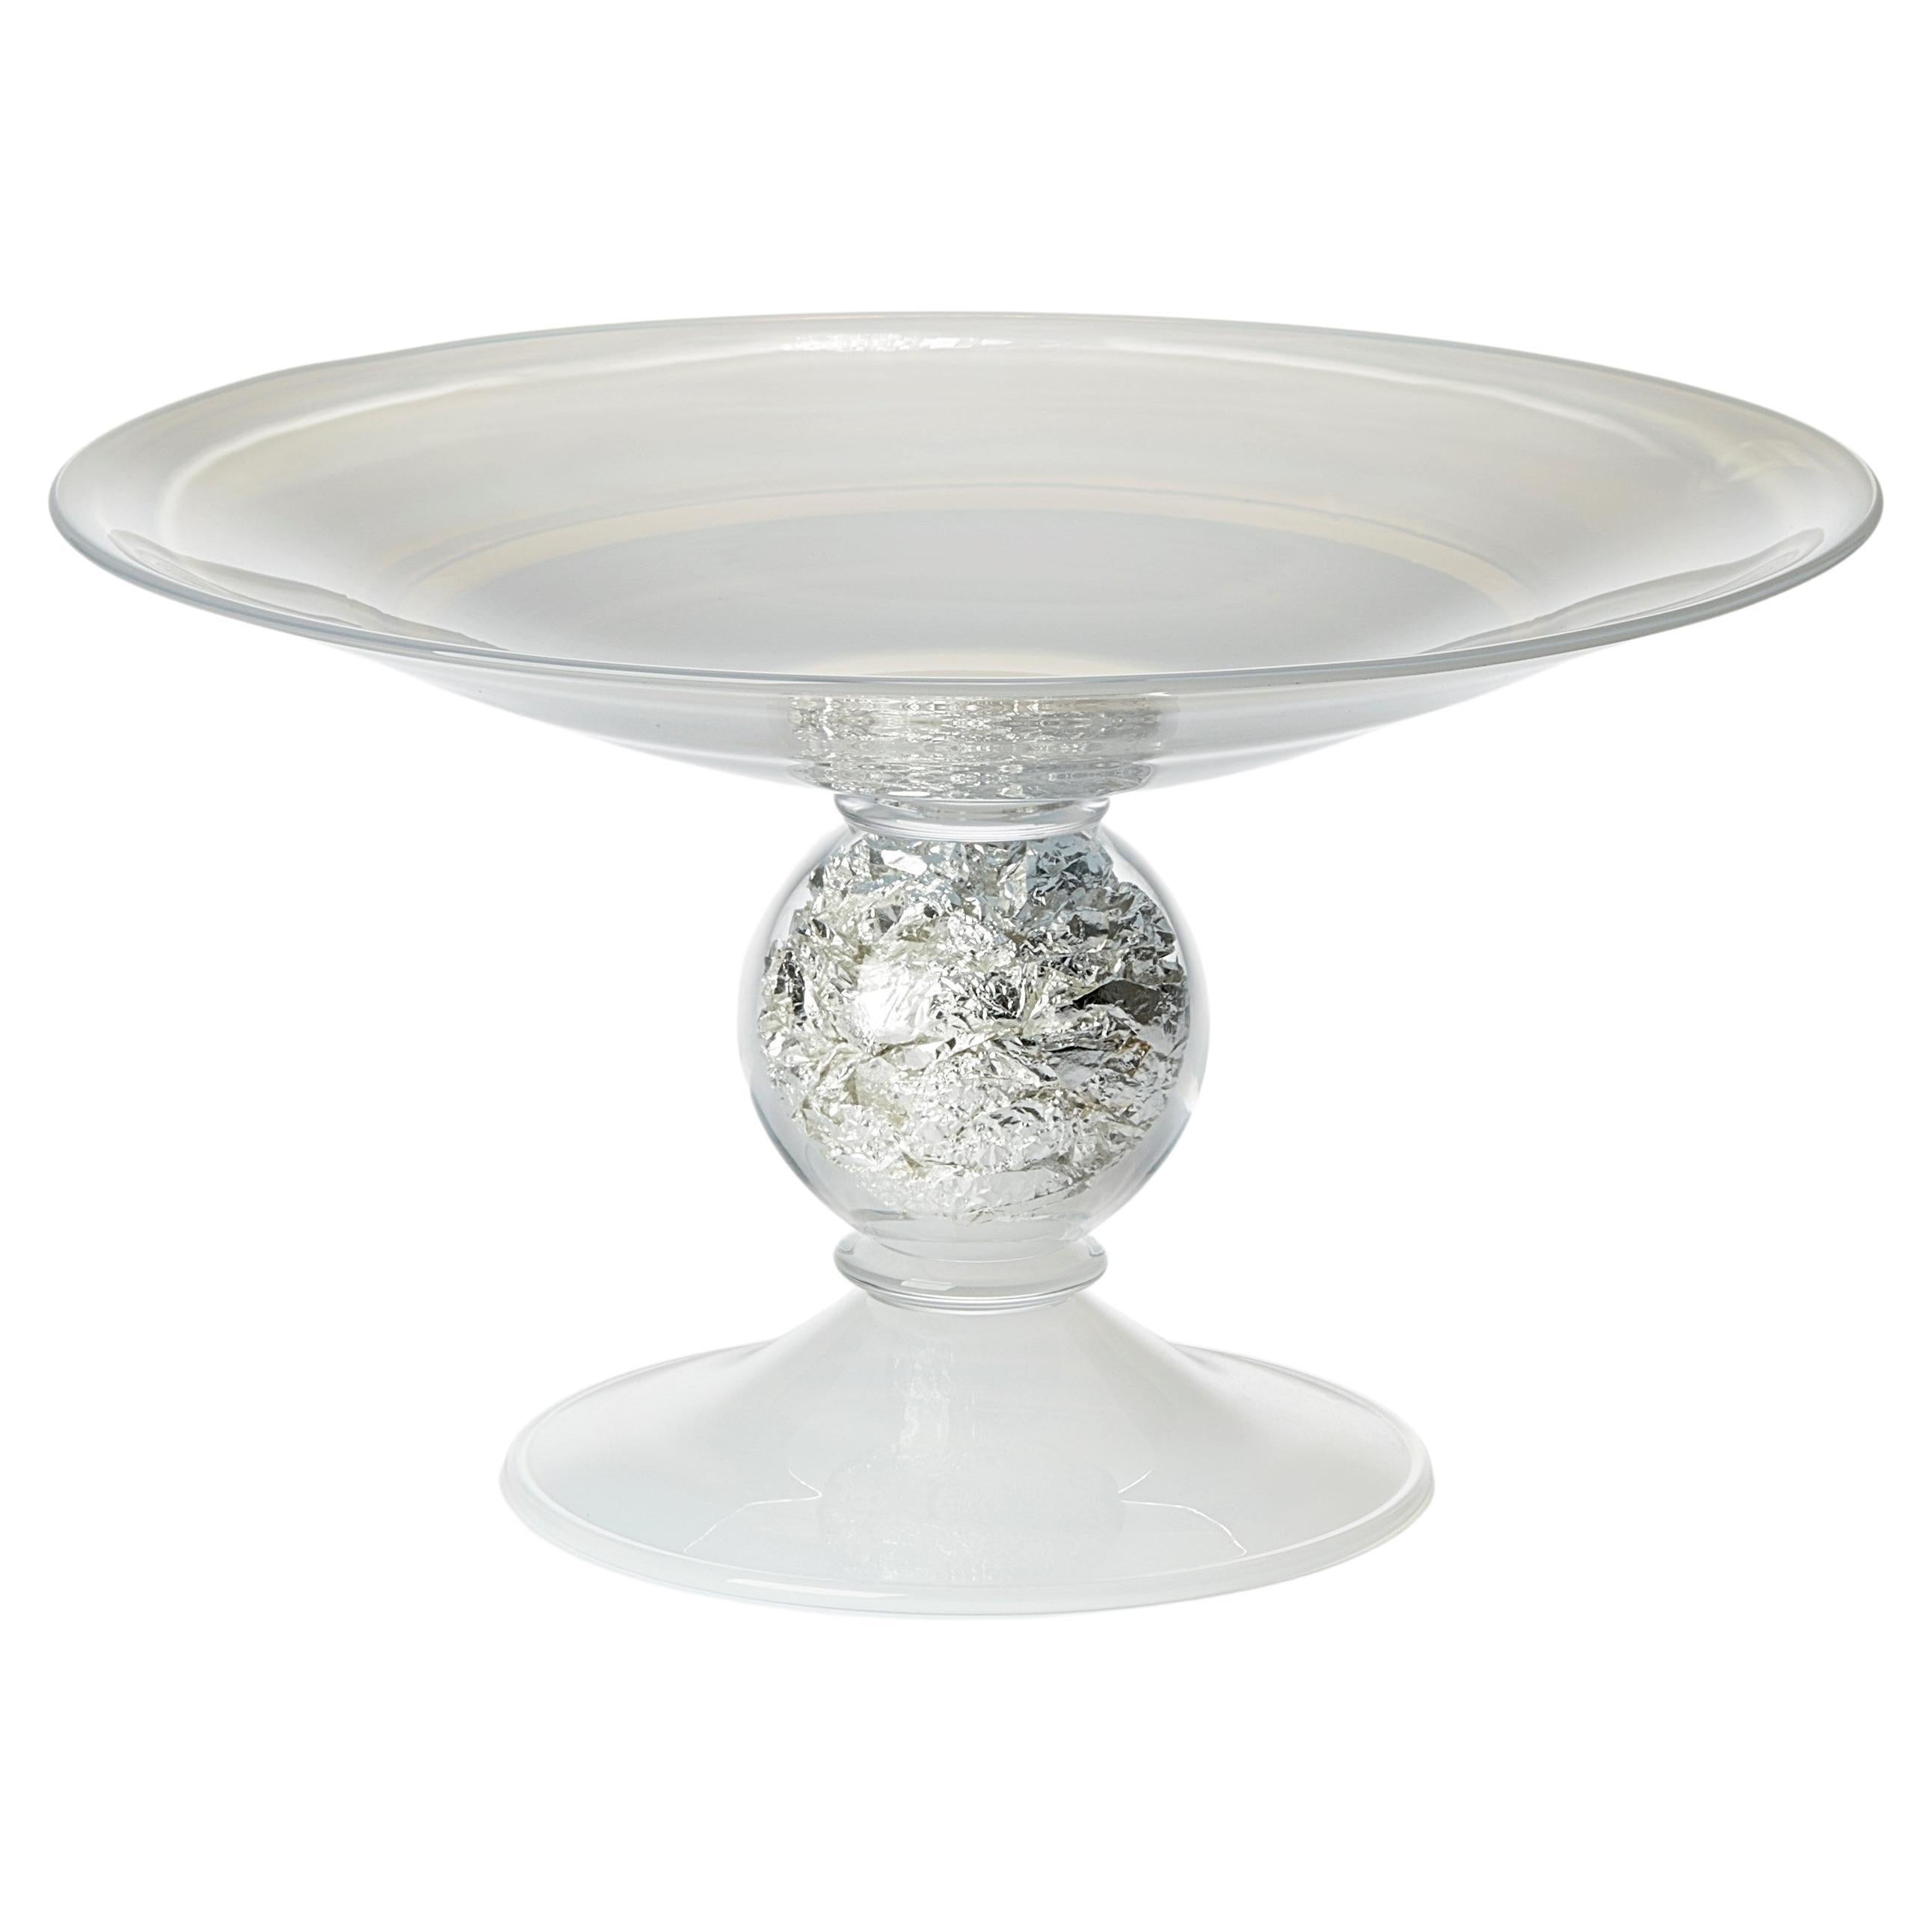 Gambo d’Argento a milky white glass & silver leaf centrepiece by Anthony Scala For Sale